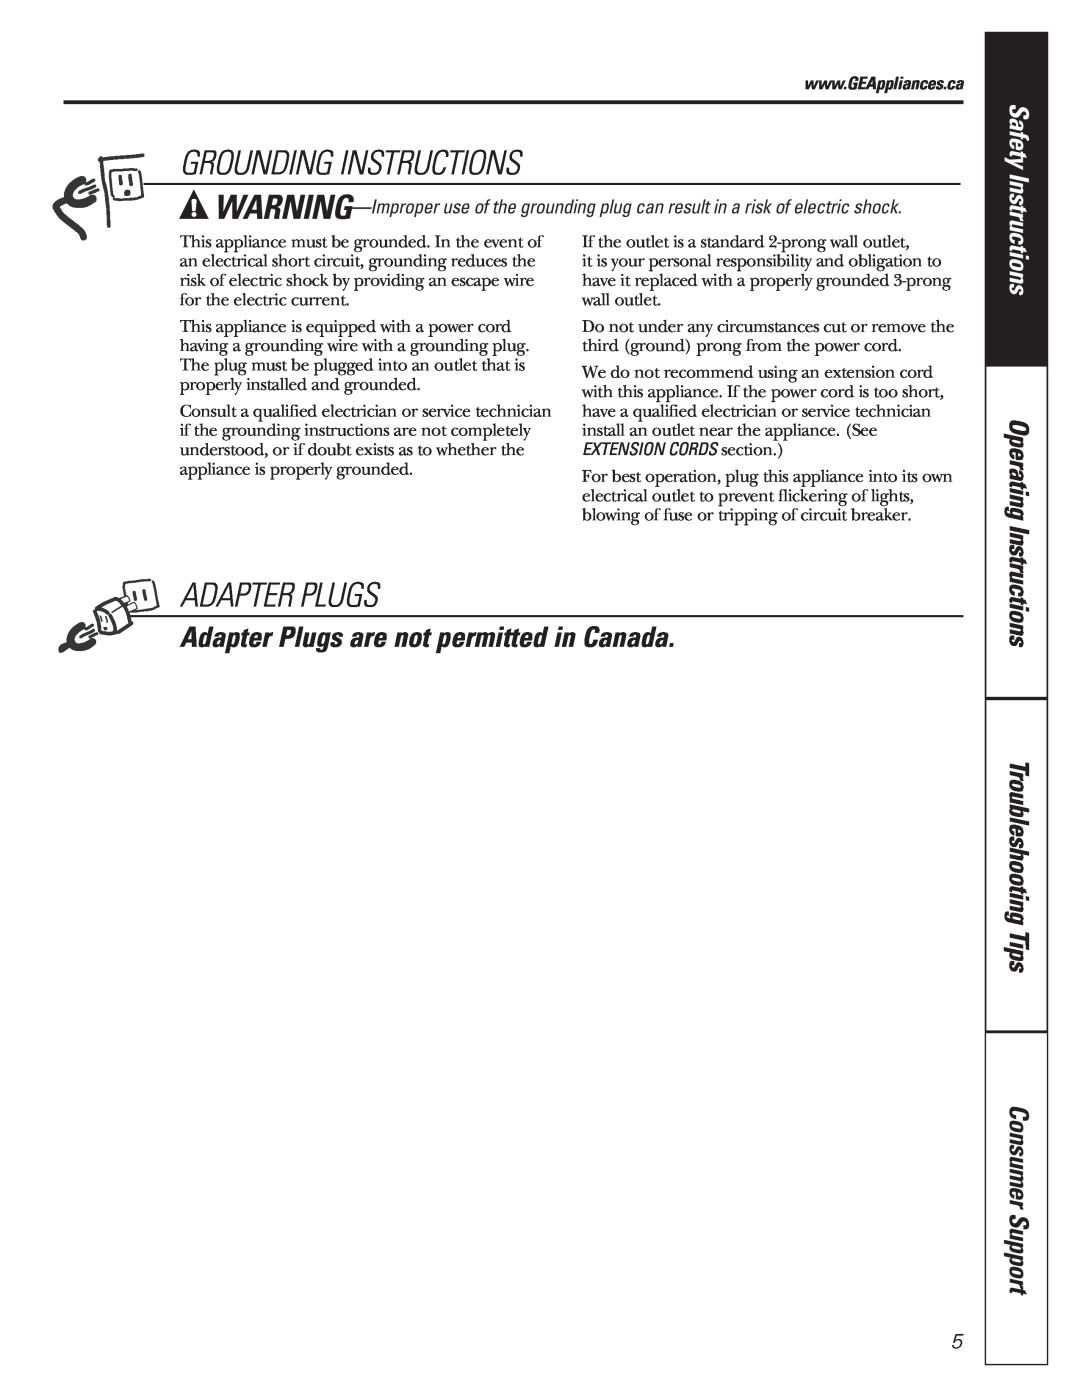 GE 350A4502P592 02-07 ATS manual Grounding Instructions, Operating, Adapter Plugs are not permitted in Canada 